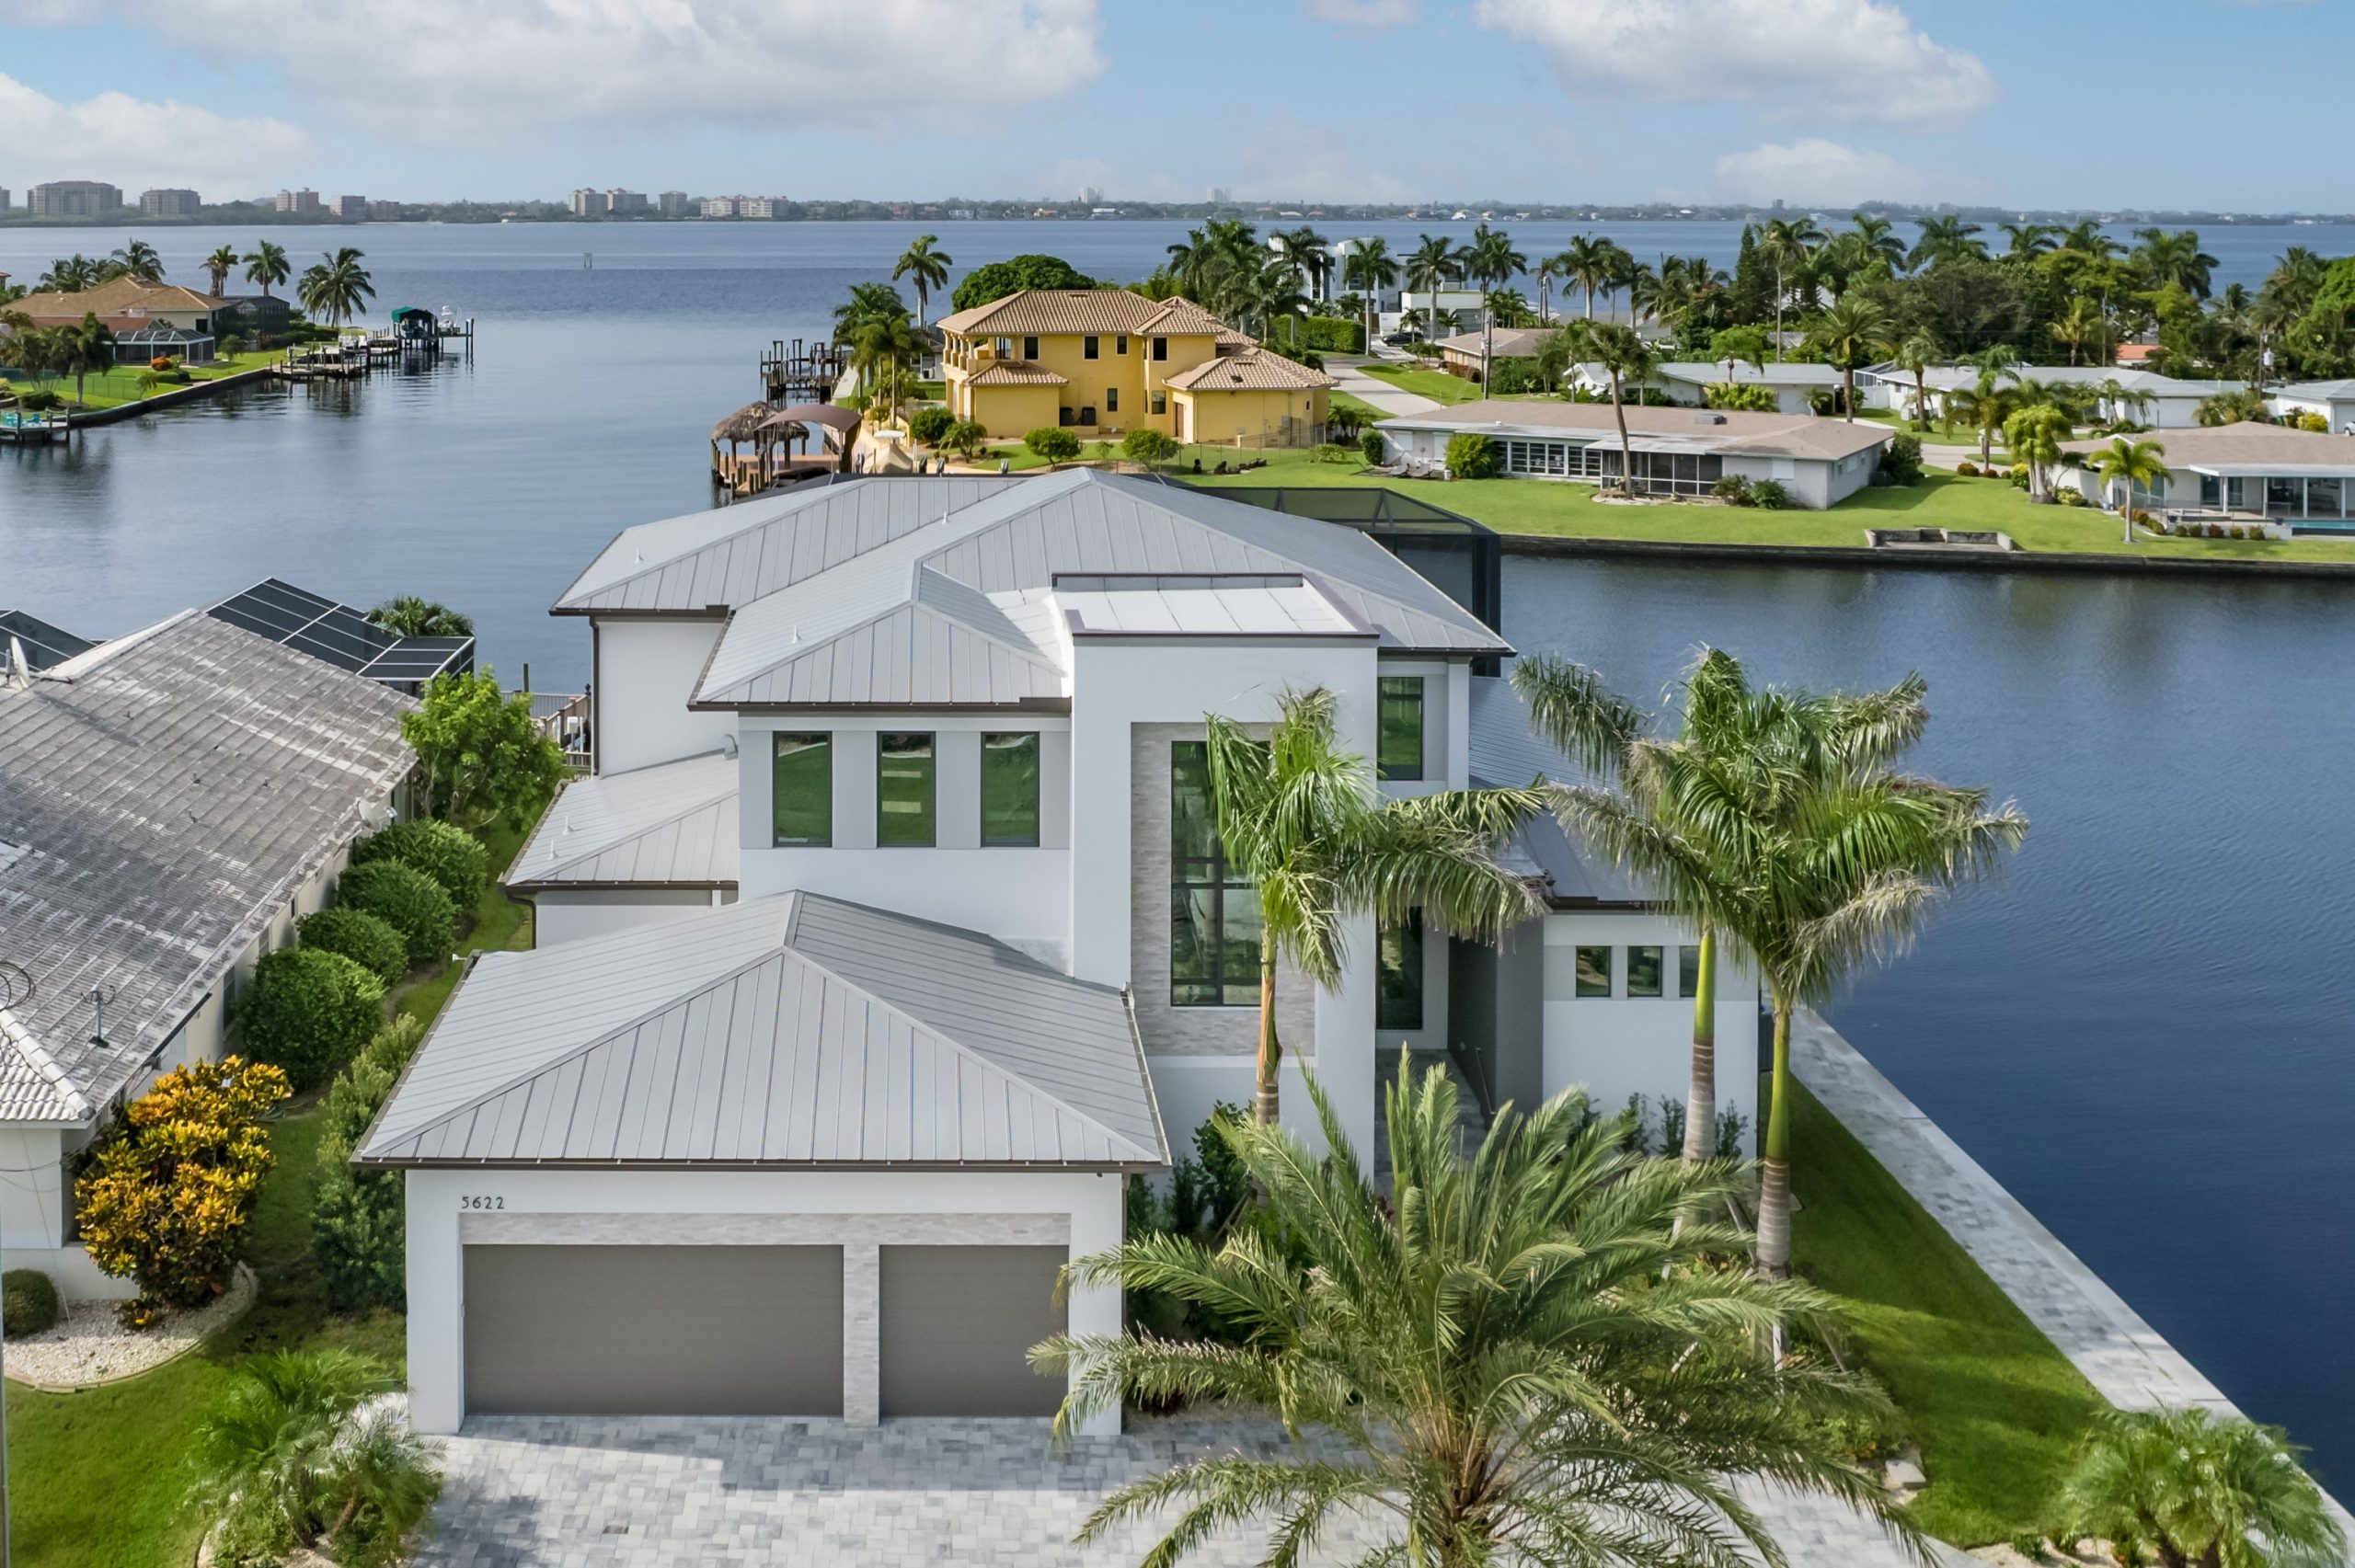 Exterior of a custom home built by Aubuchon Homes along a direct Gulf access waterway in Cape Coral, FL.